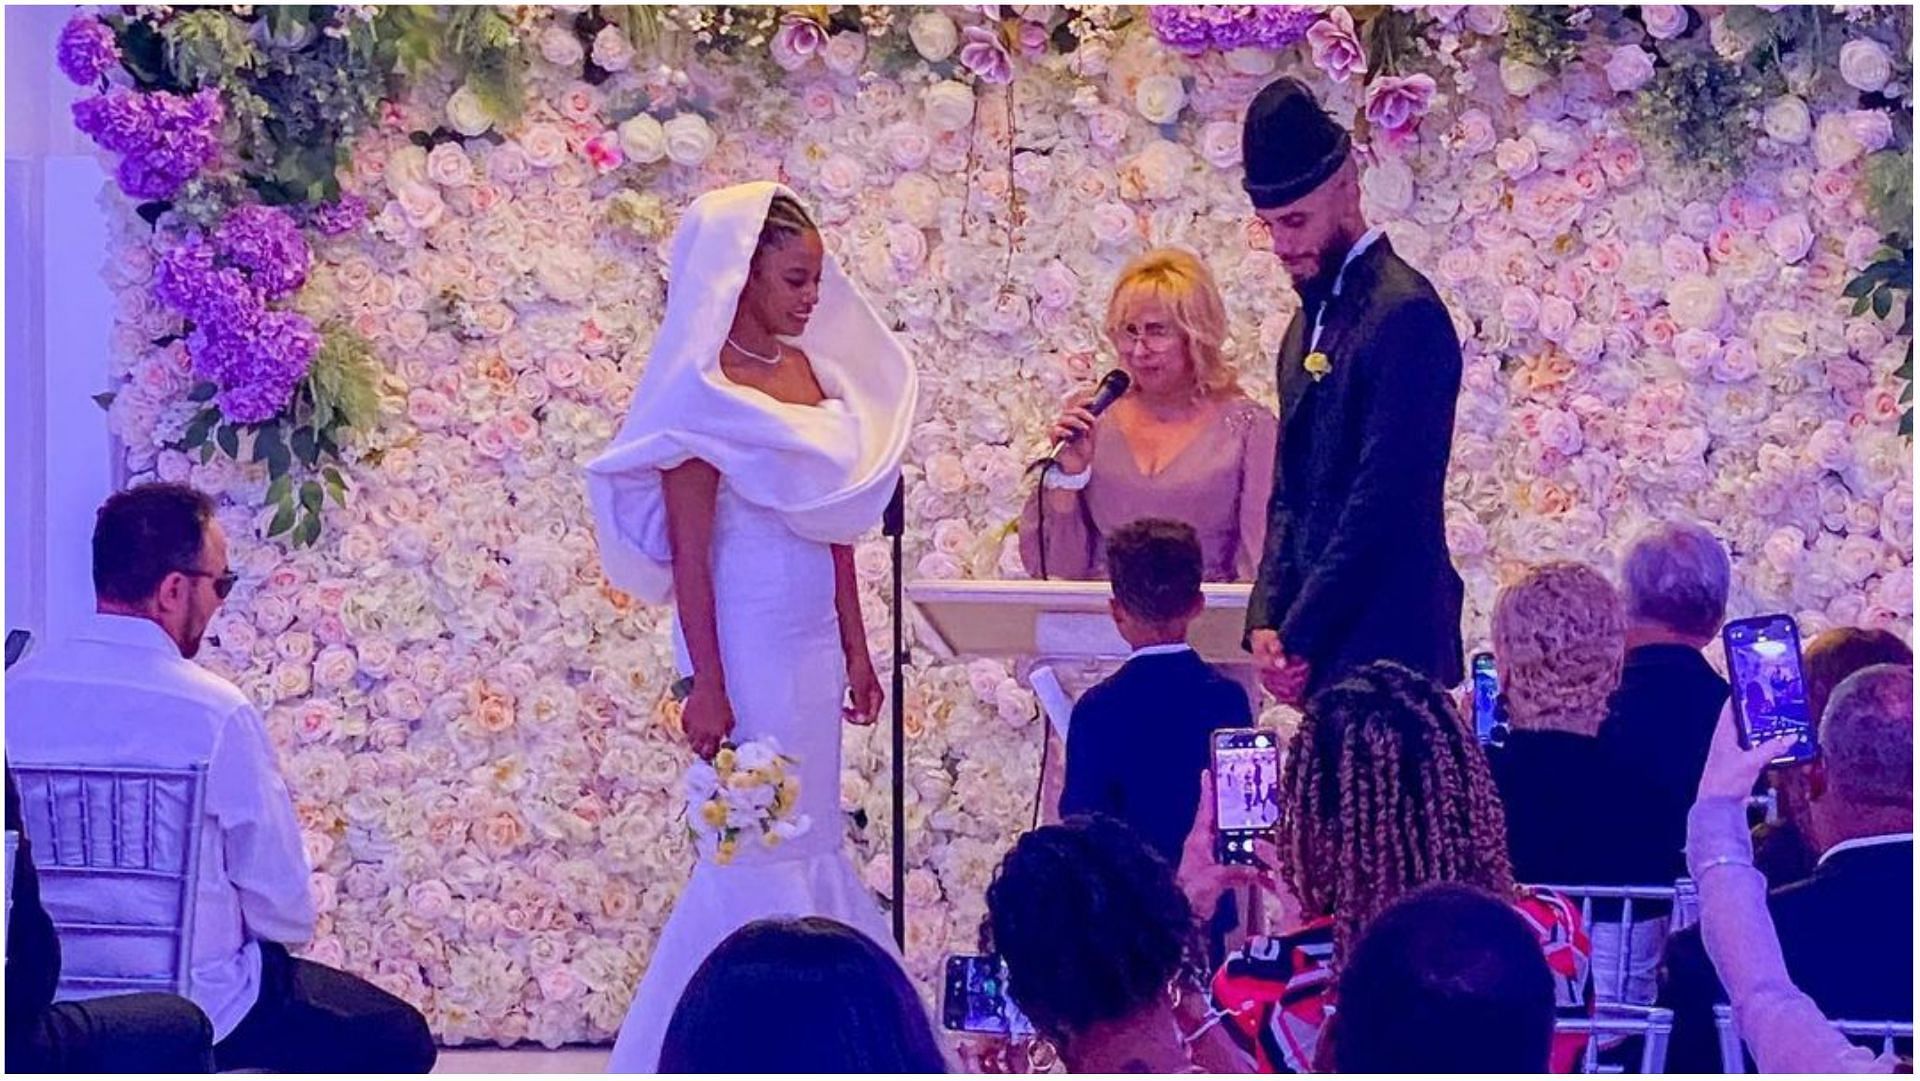 Taylour Paige and Rivington Starchild on their wedding day (Image via loganlaurice/Instagram)